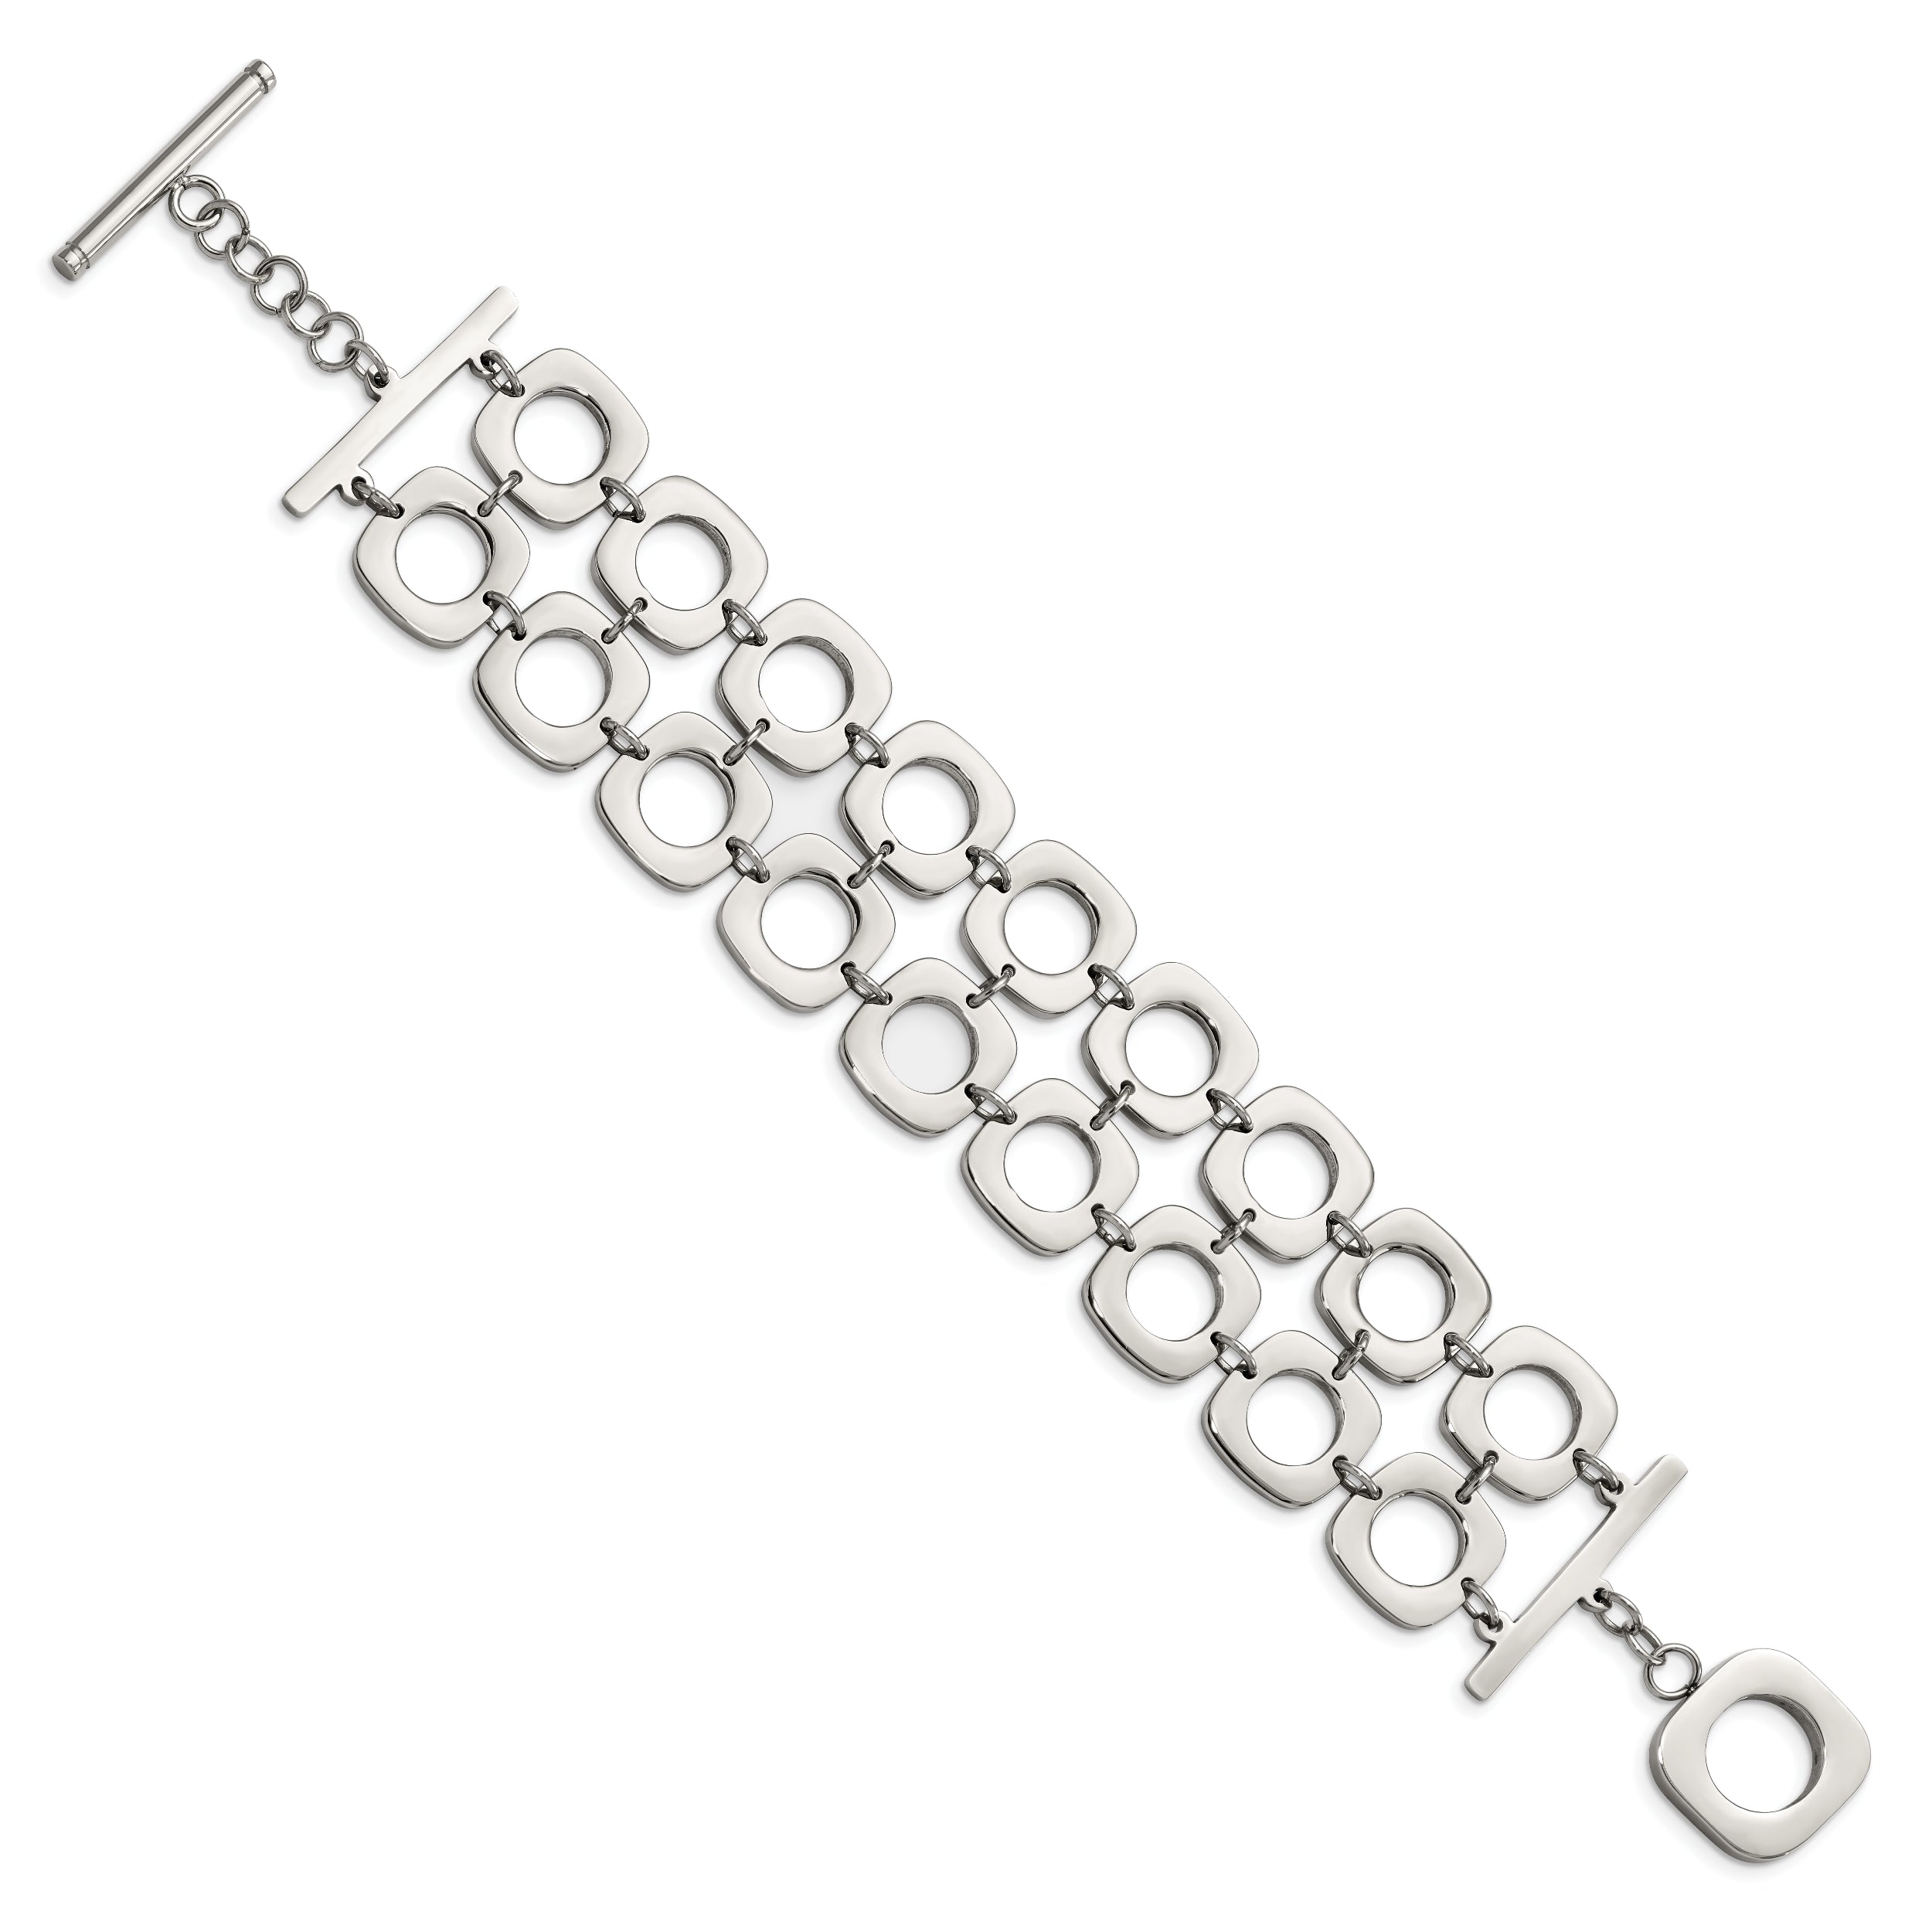 Stainless Steel Polished Double Row Square 8in Toggle Bracelet